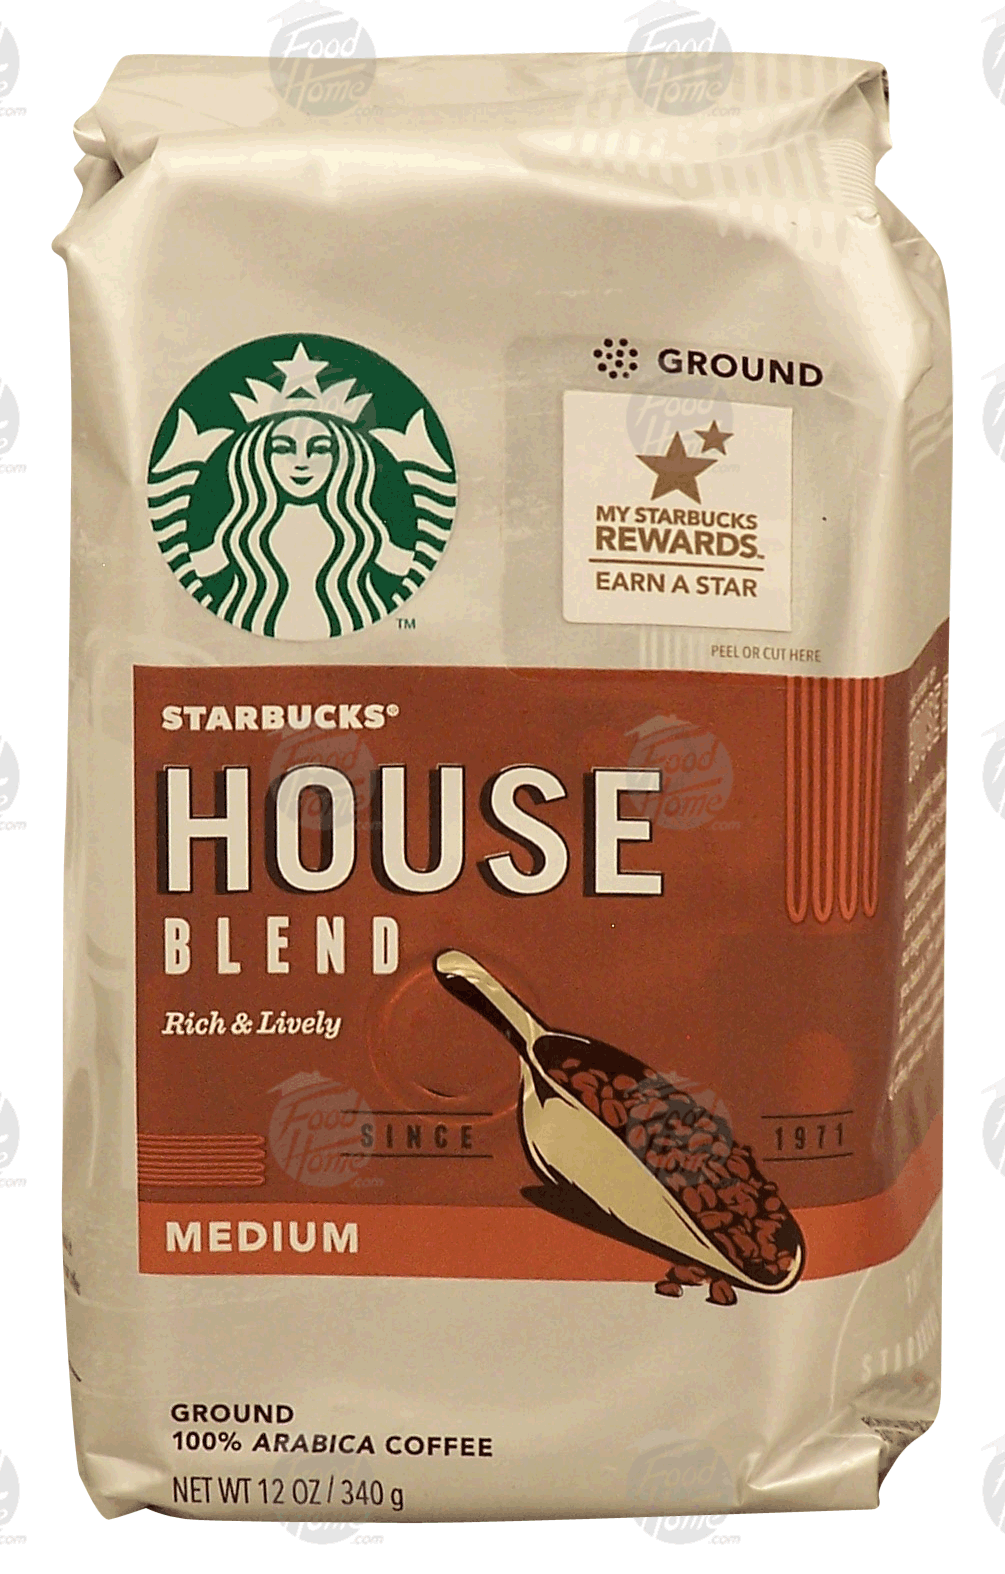 Starbucks House Blend rich & lively, medium roast ground coffee, 100% arabica coffee Full-Size Picture